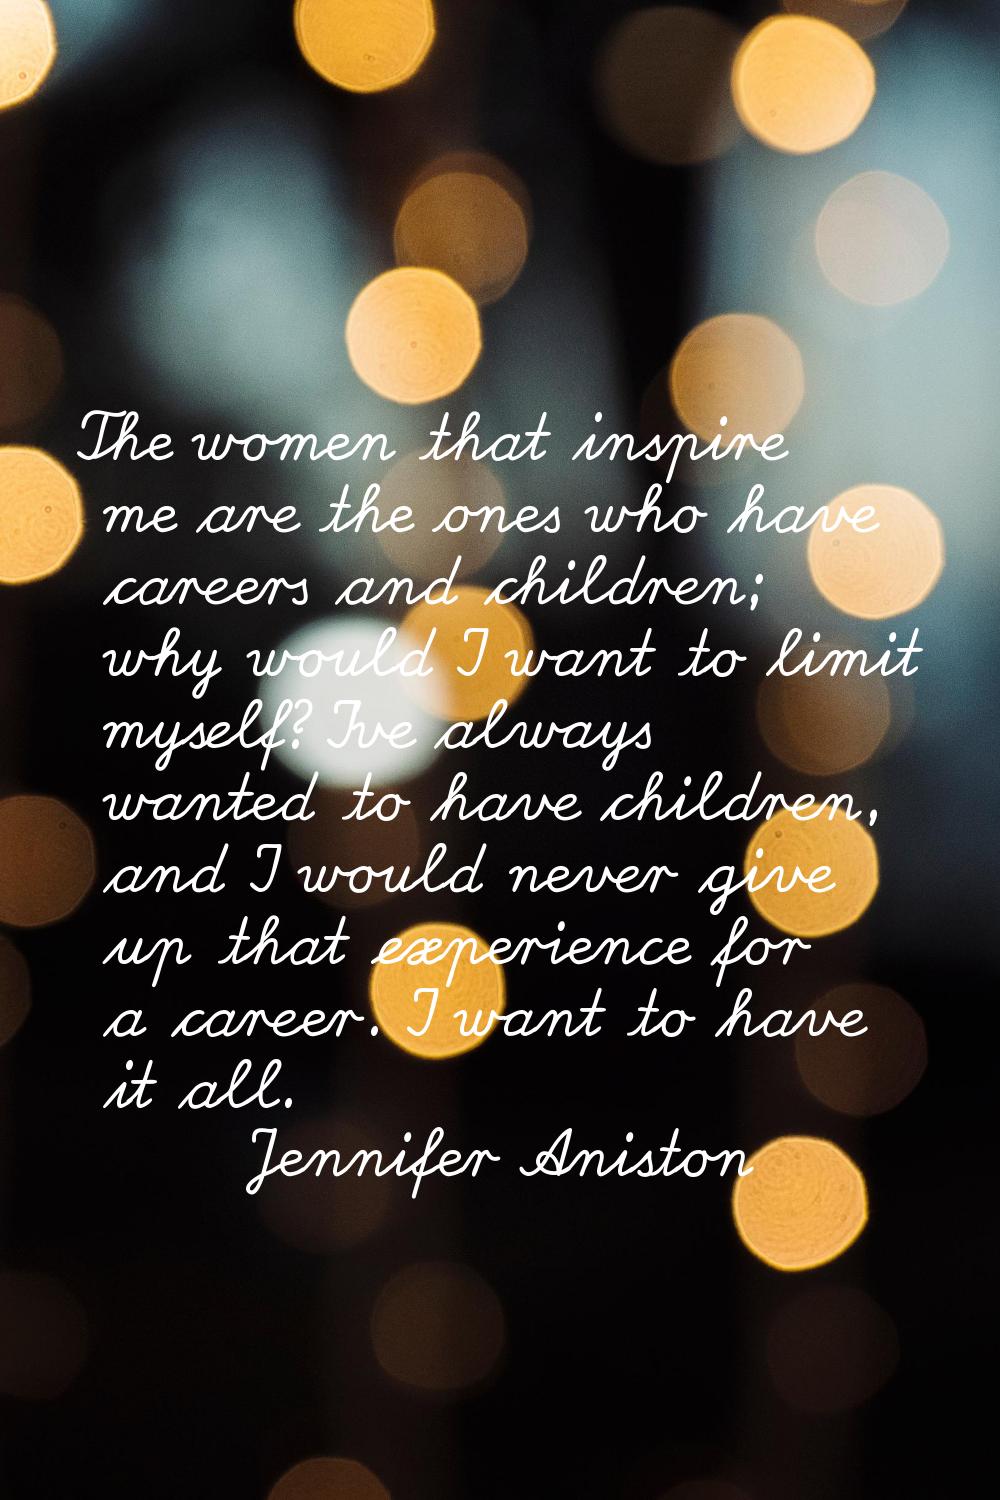 The women that inspire me are the ones who have careers and children; why would I want to limit mys